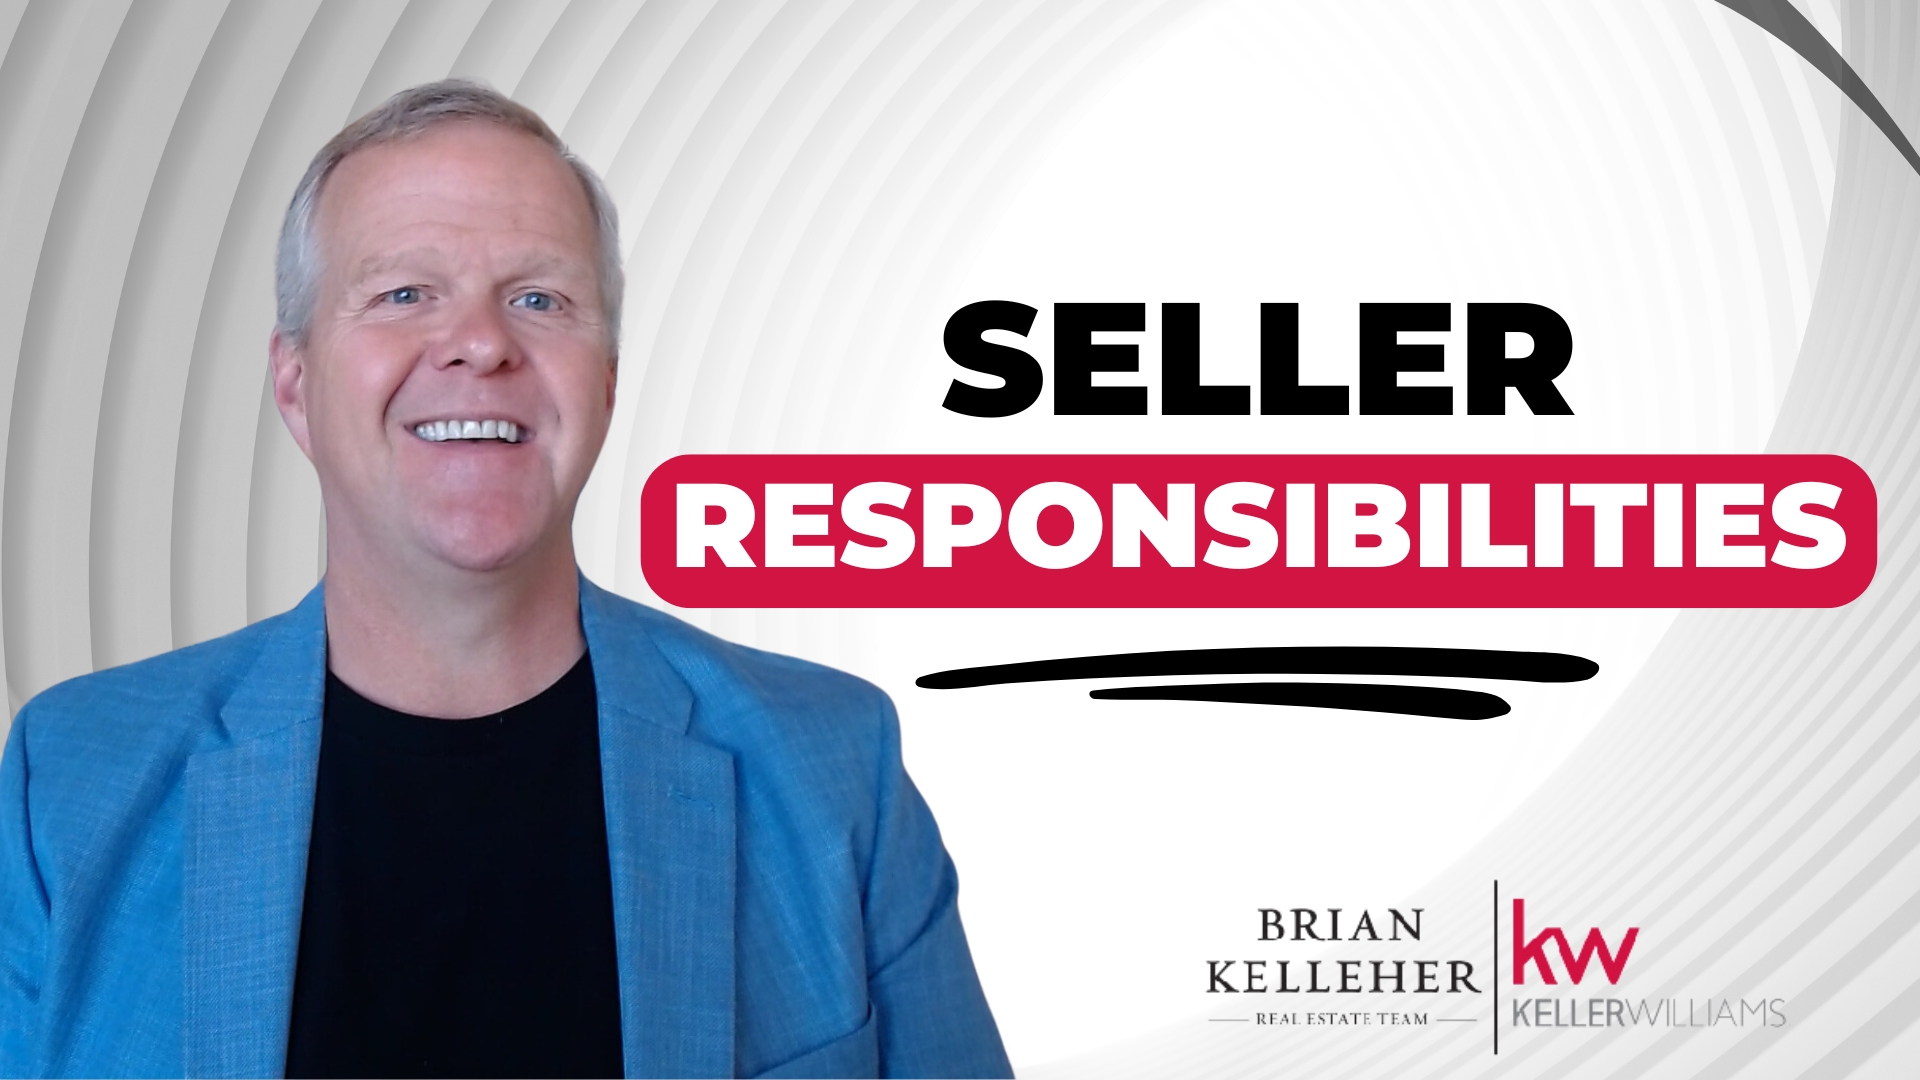 Closing Day Approaching? Know Your Responsibilities As A Seller 